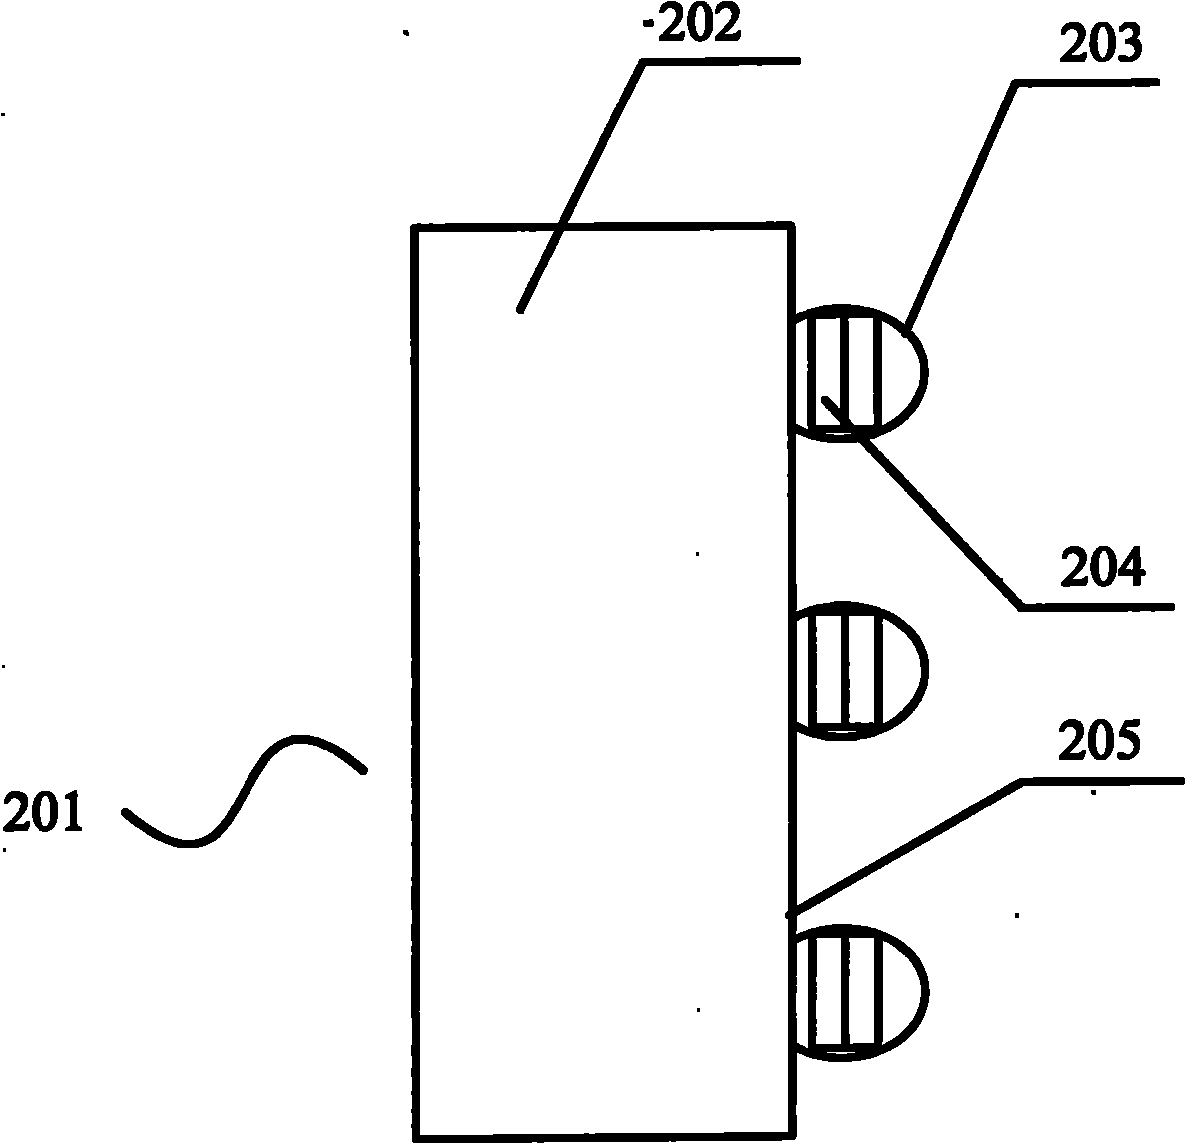 Light and thin LED display screen and LED display system